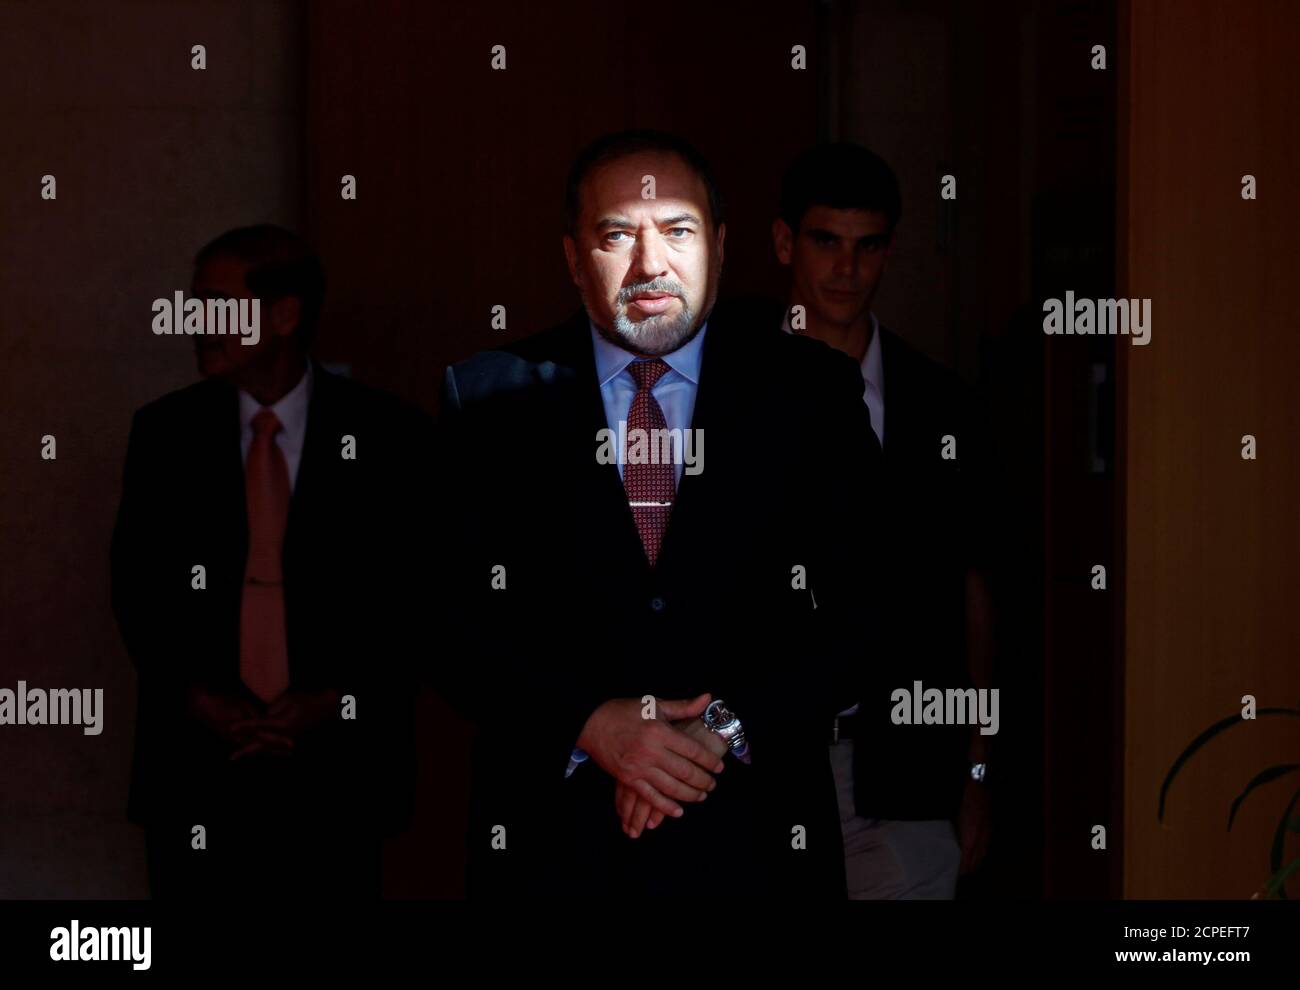 Israel's Foreign Minister Avigdor Lieberman waits for the arrival of European Union's Foreign Policy Chief Catherine Ashton to their meeting in Jerusalem August 29, 2011. REUTERS/Baz Ratner/File Photo Stock Photo